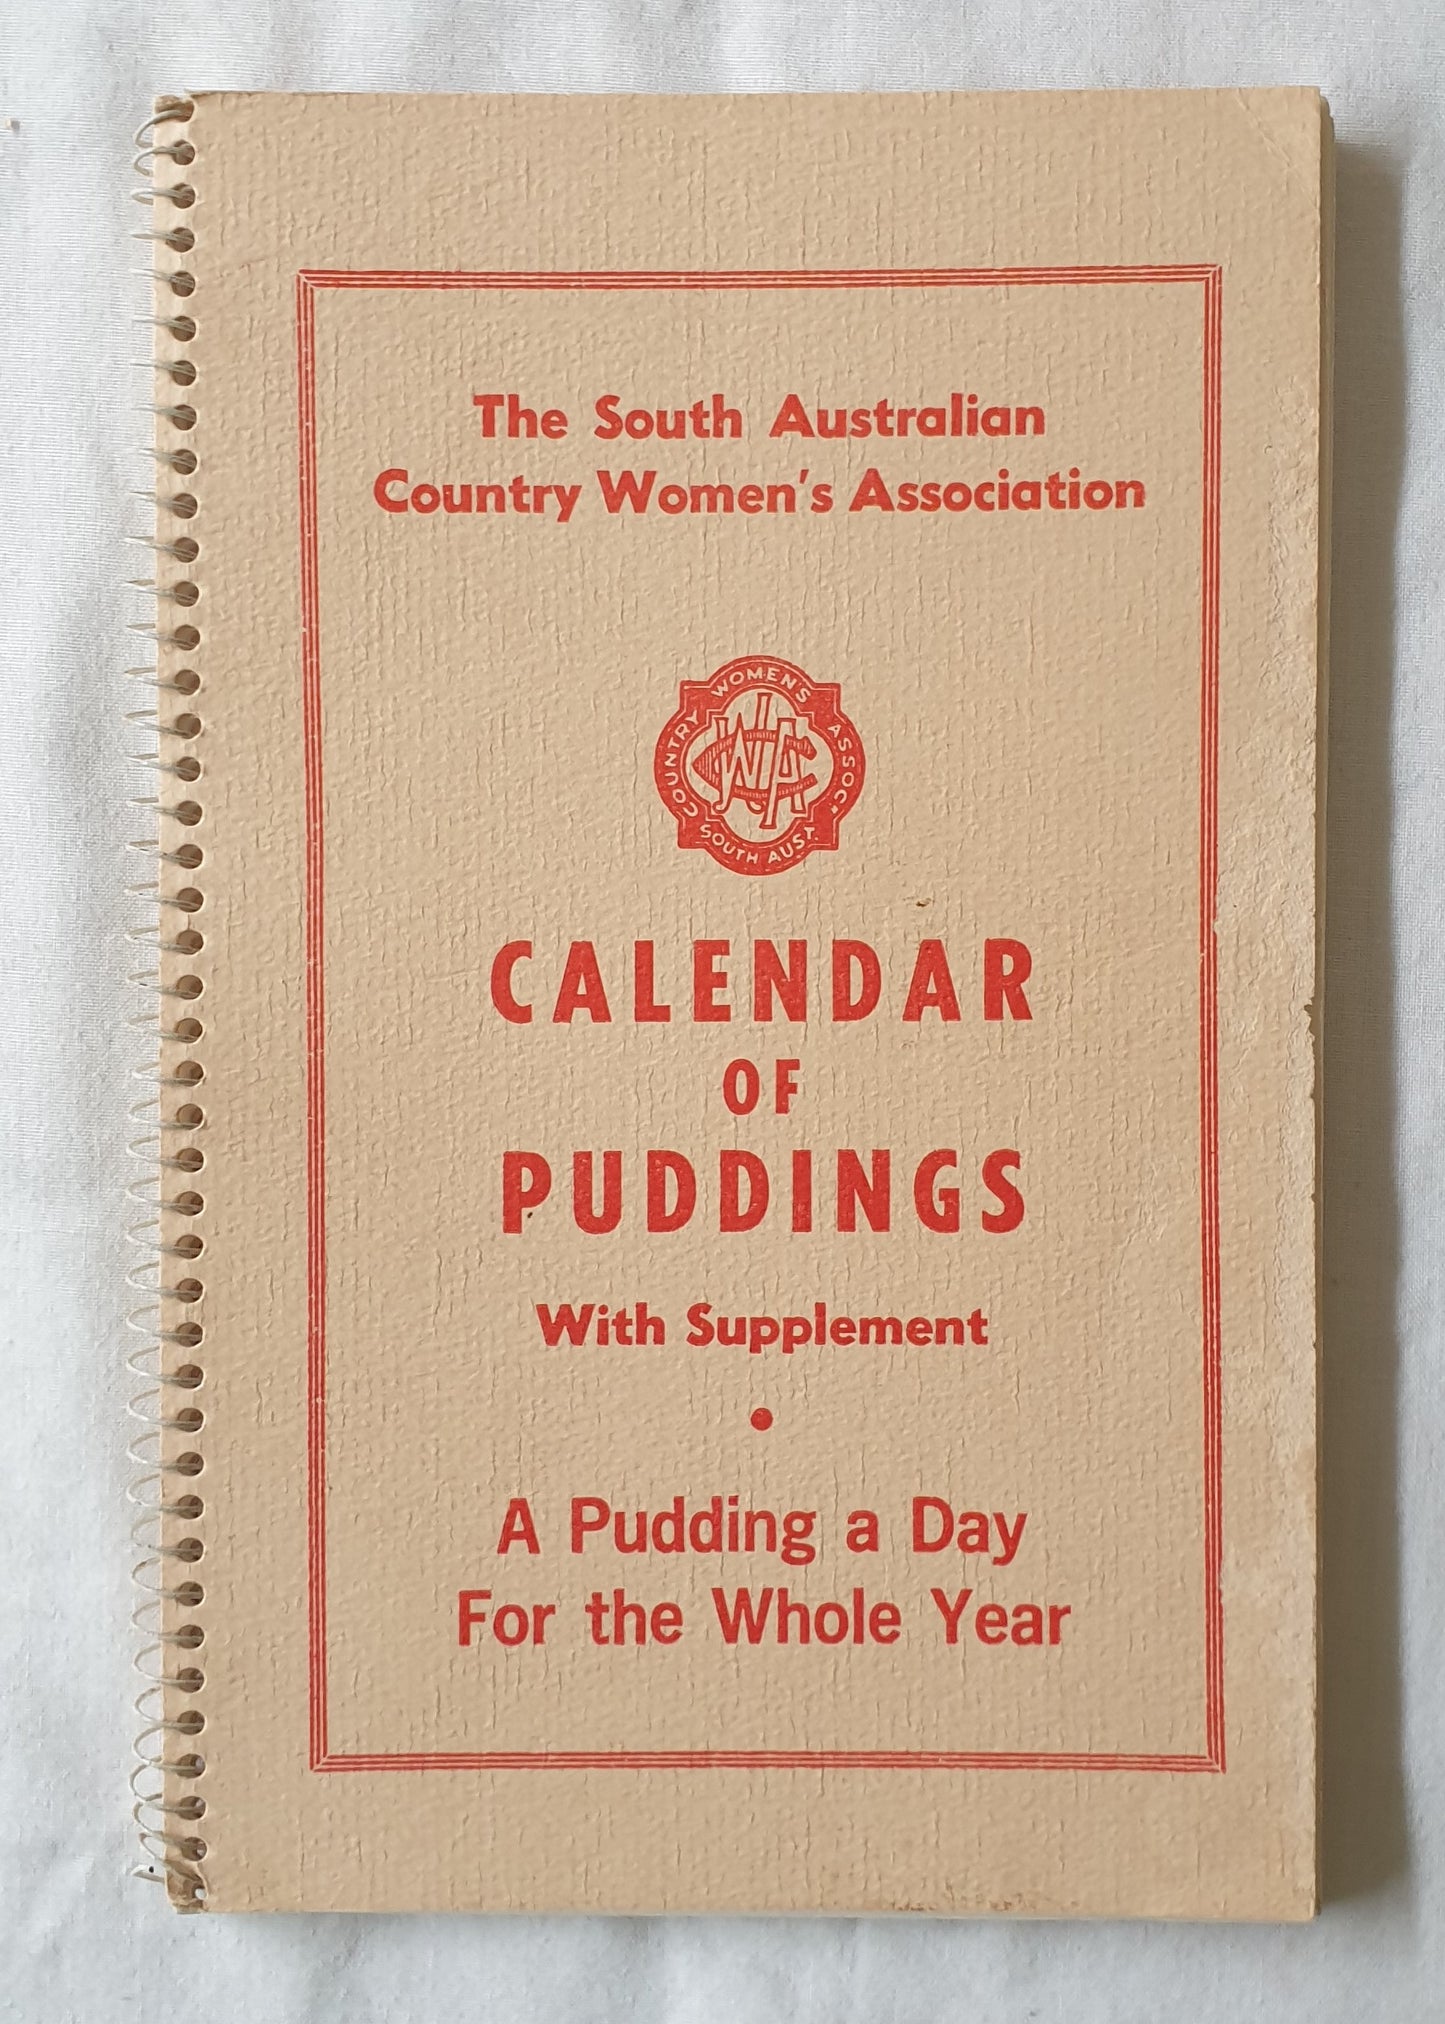 Calendar of Puddings with Supplement by The South Australian Country Women’s Association